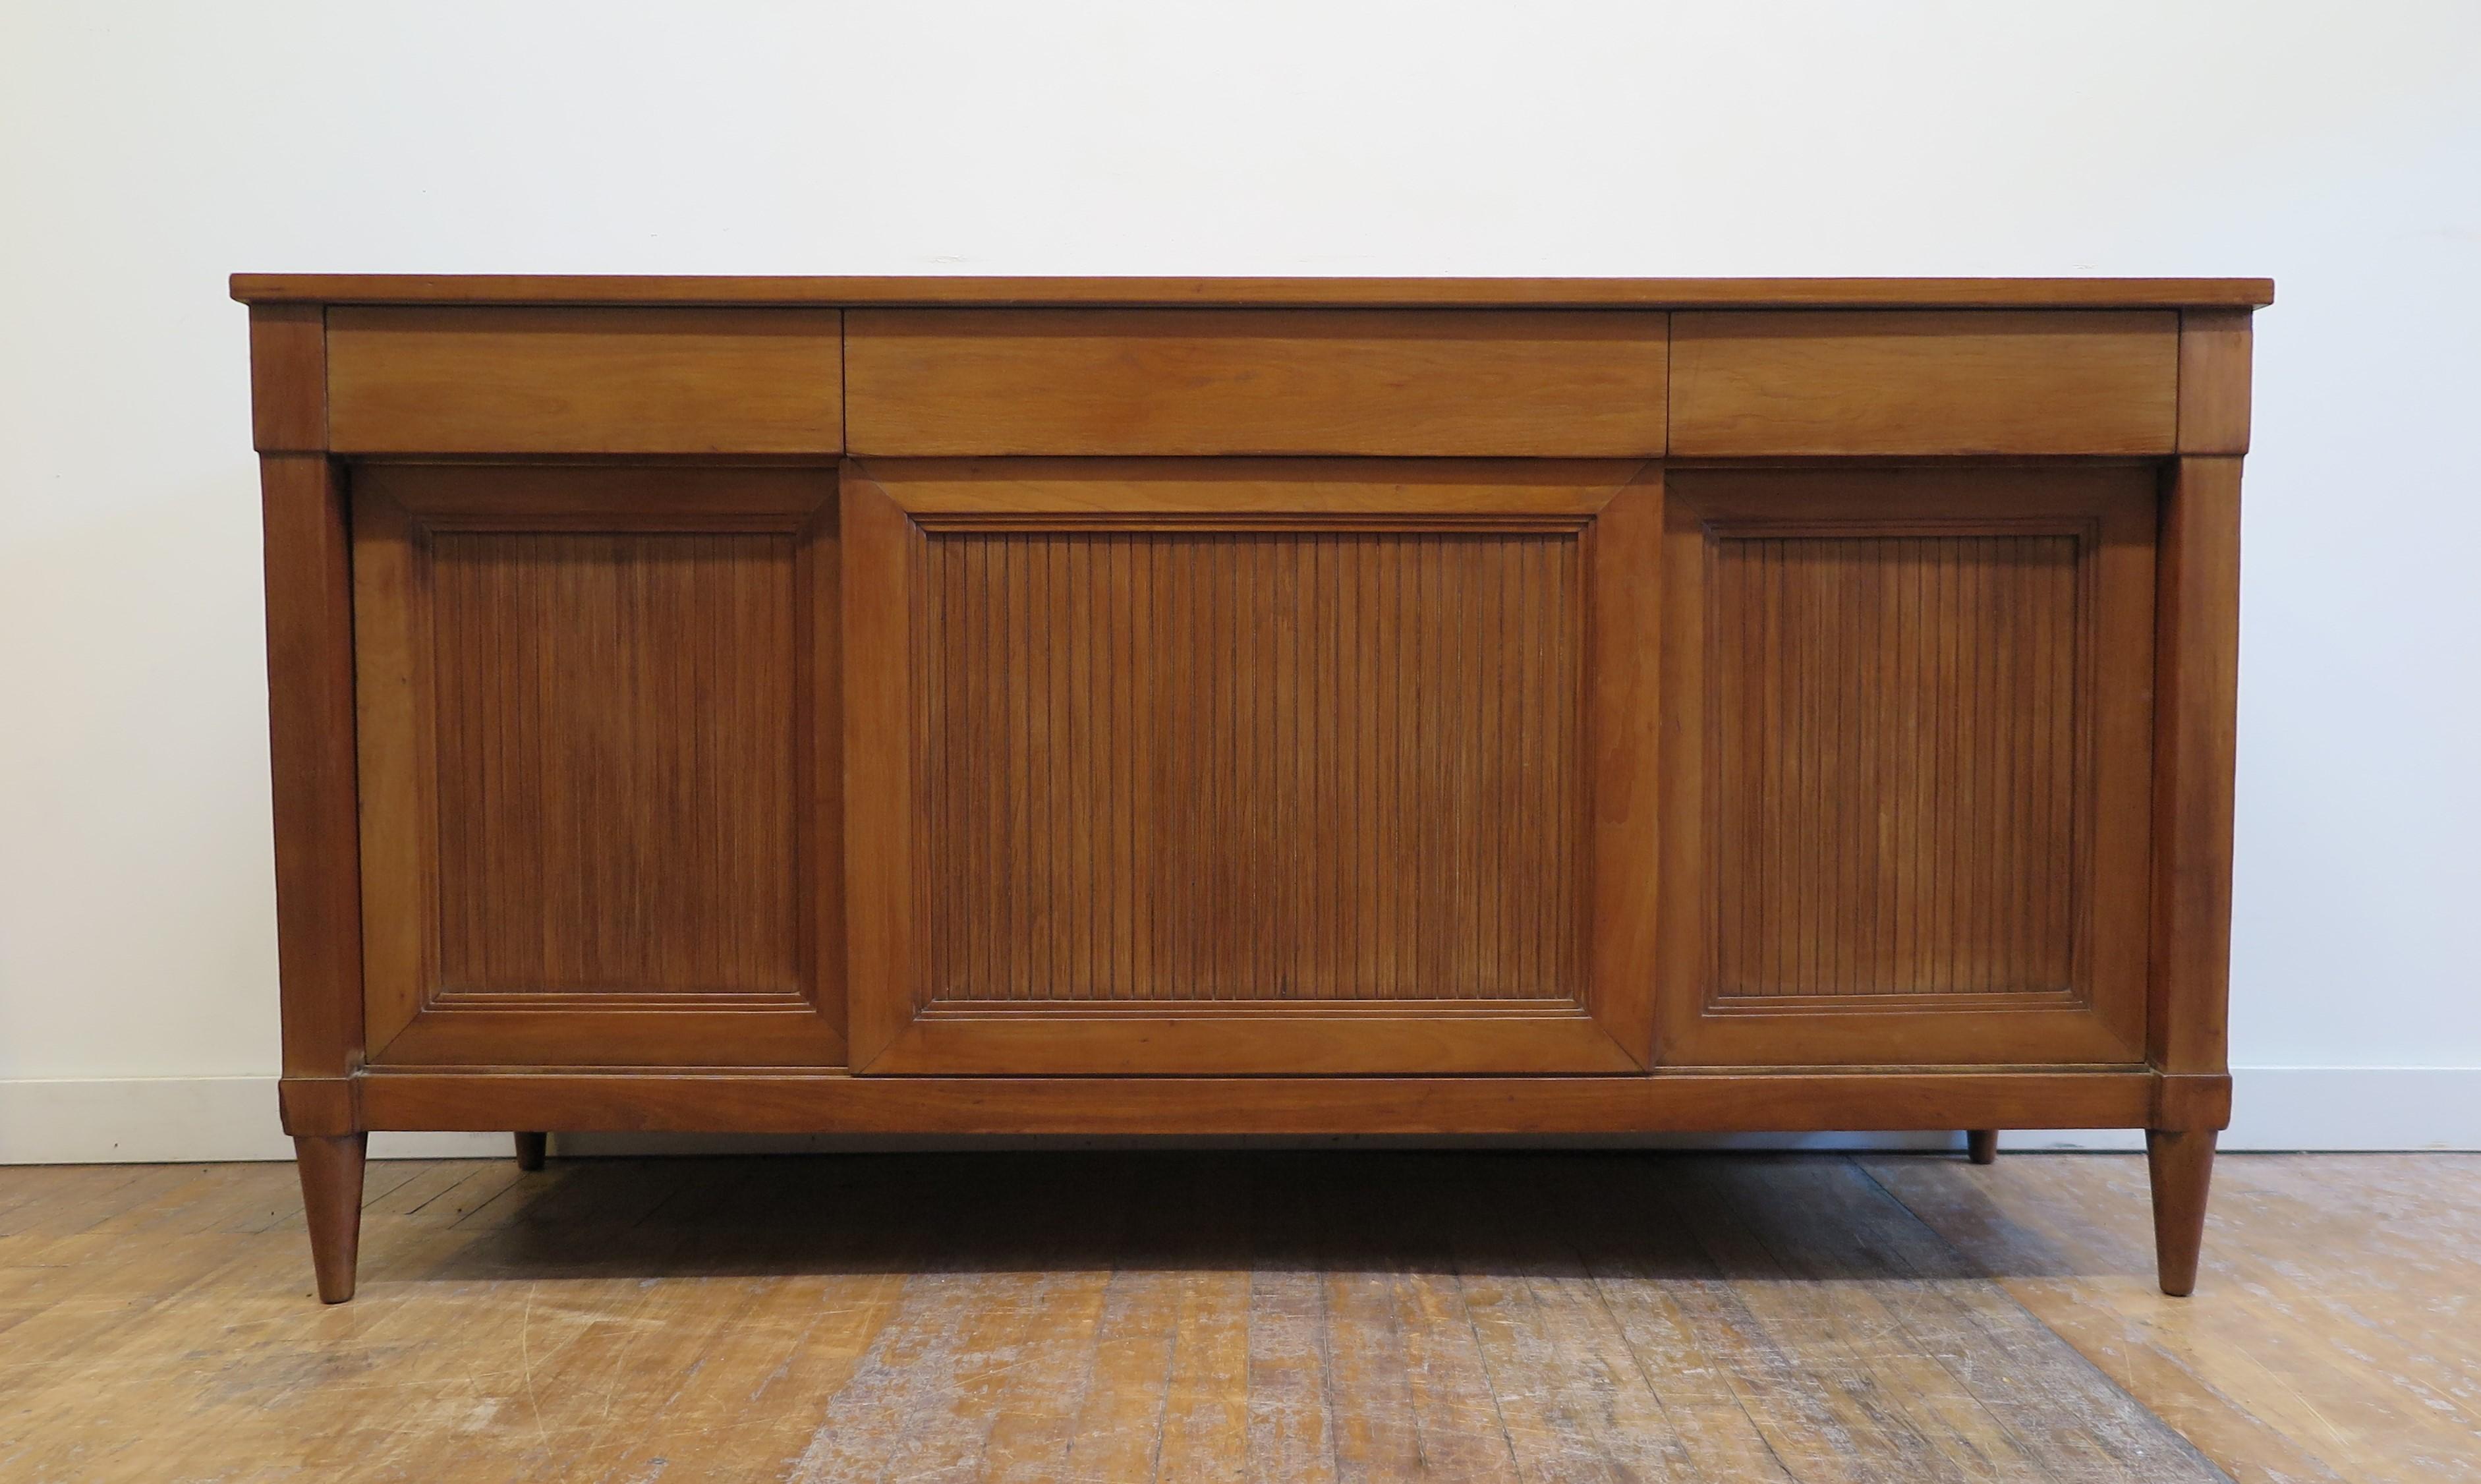 Mid century classic directorie styled credenza sideboard. A Classic styled credenza having modern directorie styling incorporated into the clean lines. Made in the late 1950's of Cherry wood and veneers. Very functional having three drawers across